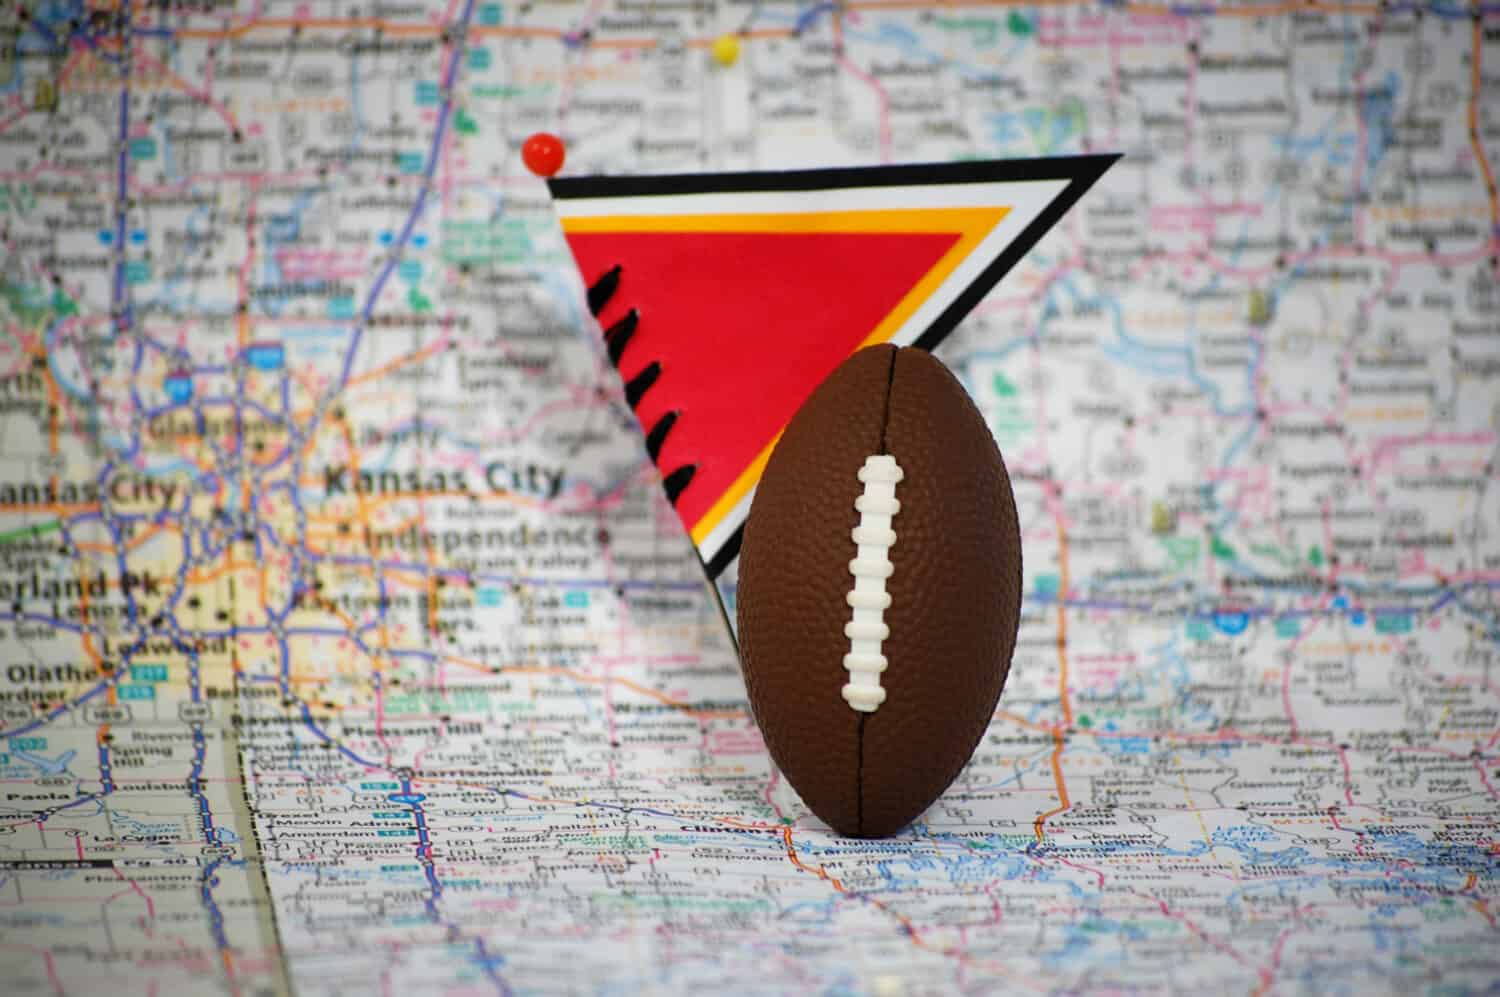 Macro shot of a flag and football on Kansas City, Missouri in a map.